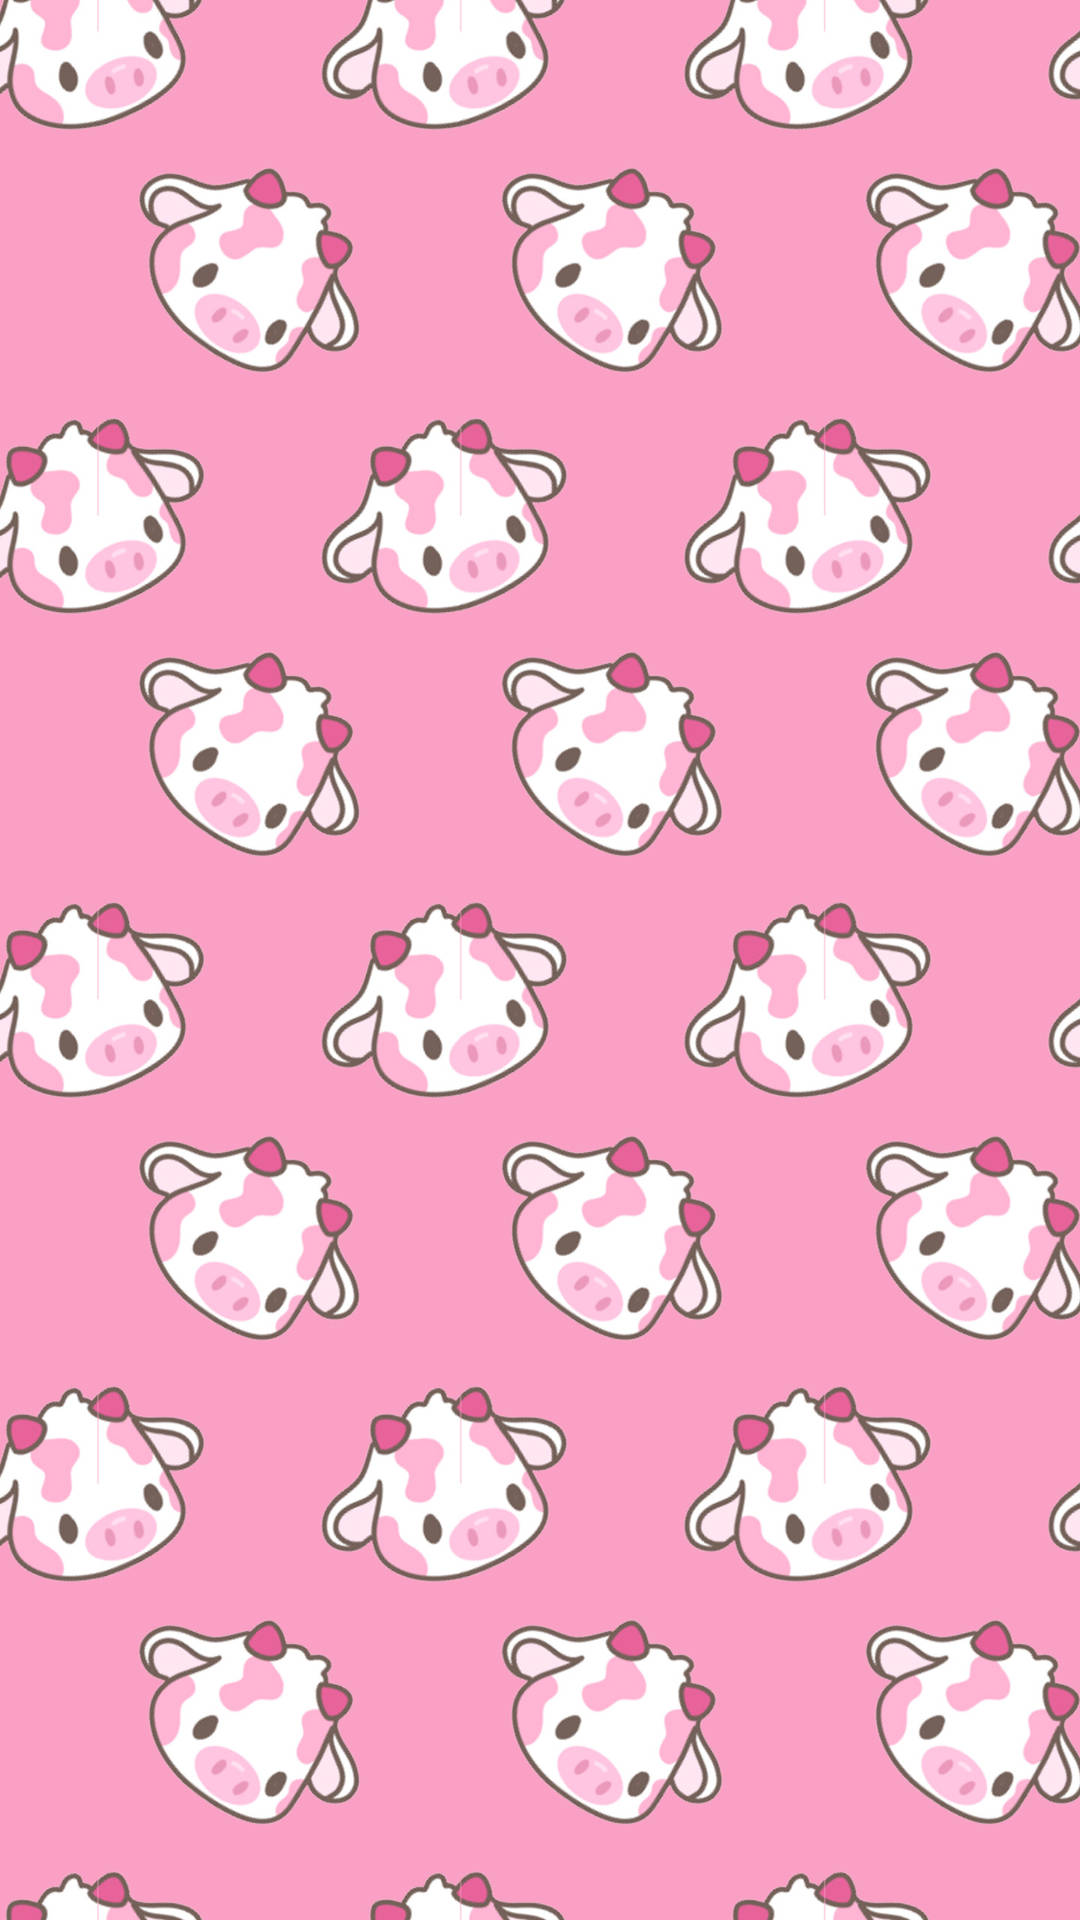 Strawberry Cow With Horns Tiled Wallpaper